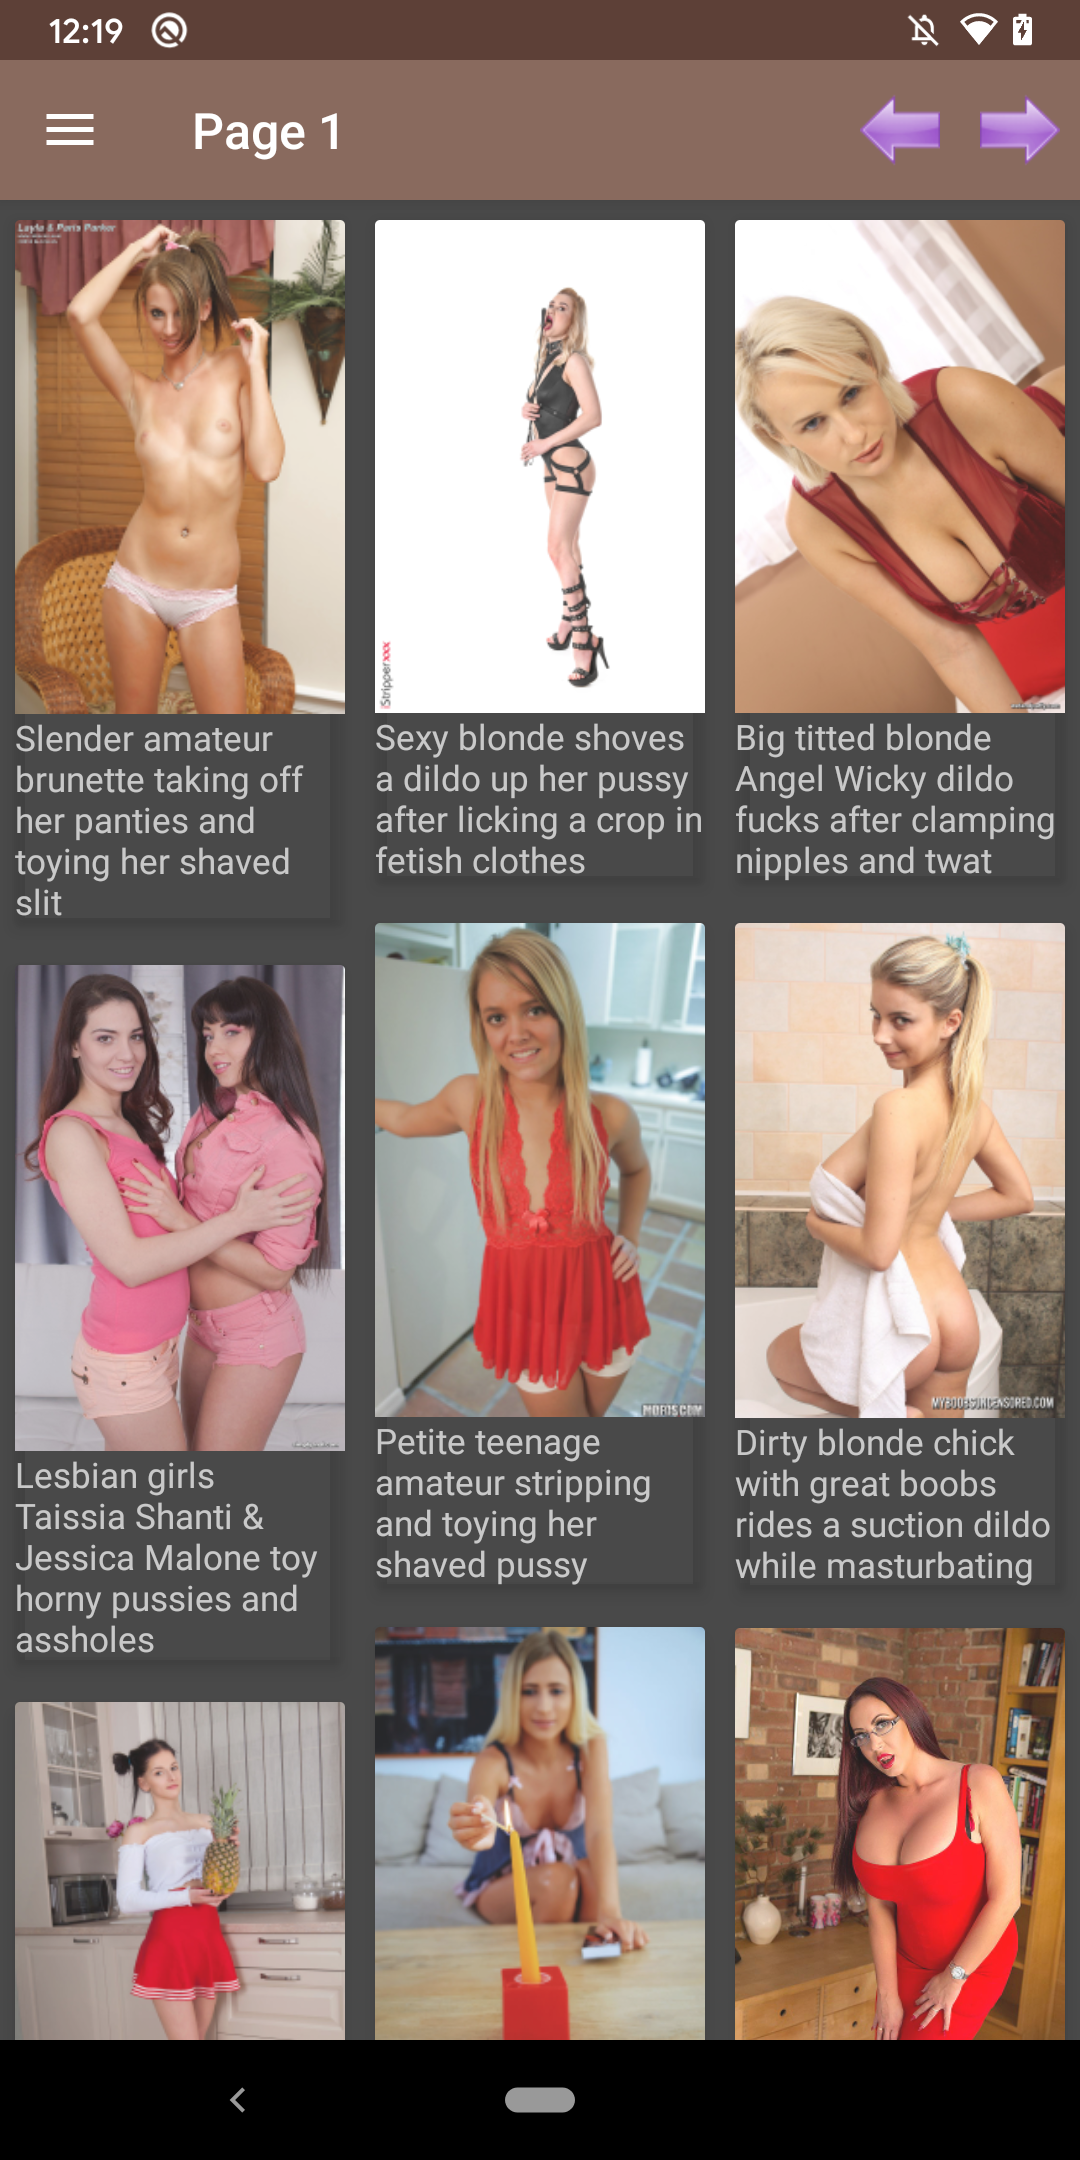 Dildo Galleries apk,sexy,hentai,video,best,collections,gallery,pornstars,rated,apps,good,pictures,viewer,amateurs,henti,dildo,photos,android,galleries,pic